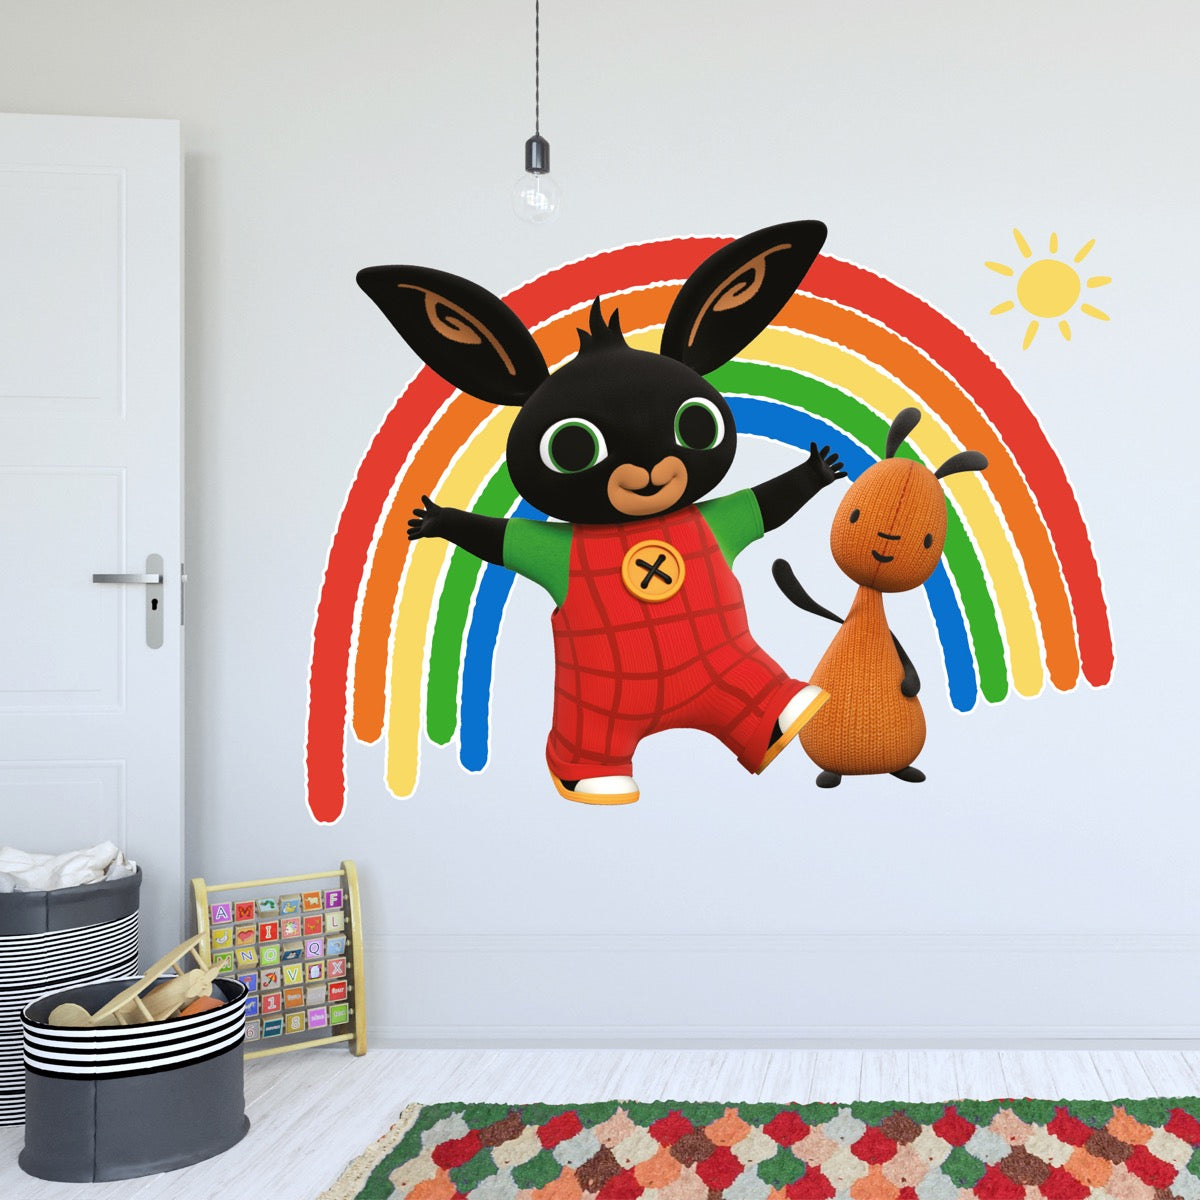 Bing Wall Sticker - Bing and Flop with Rainbow and Sun Wall Decal